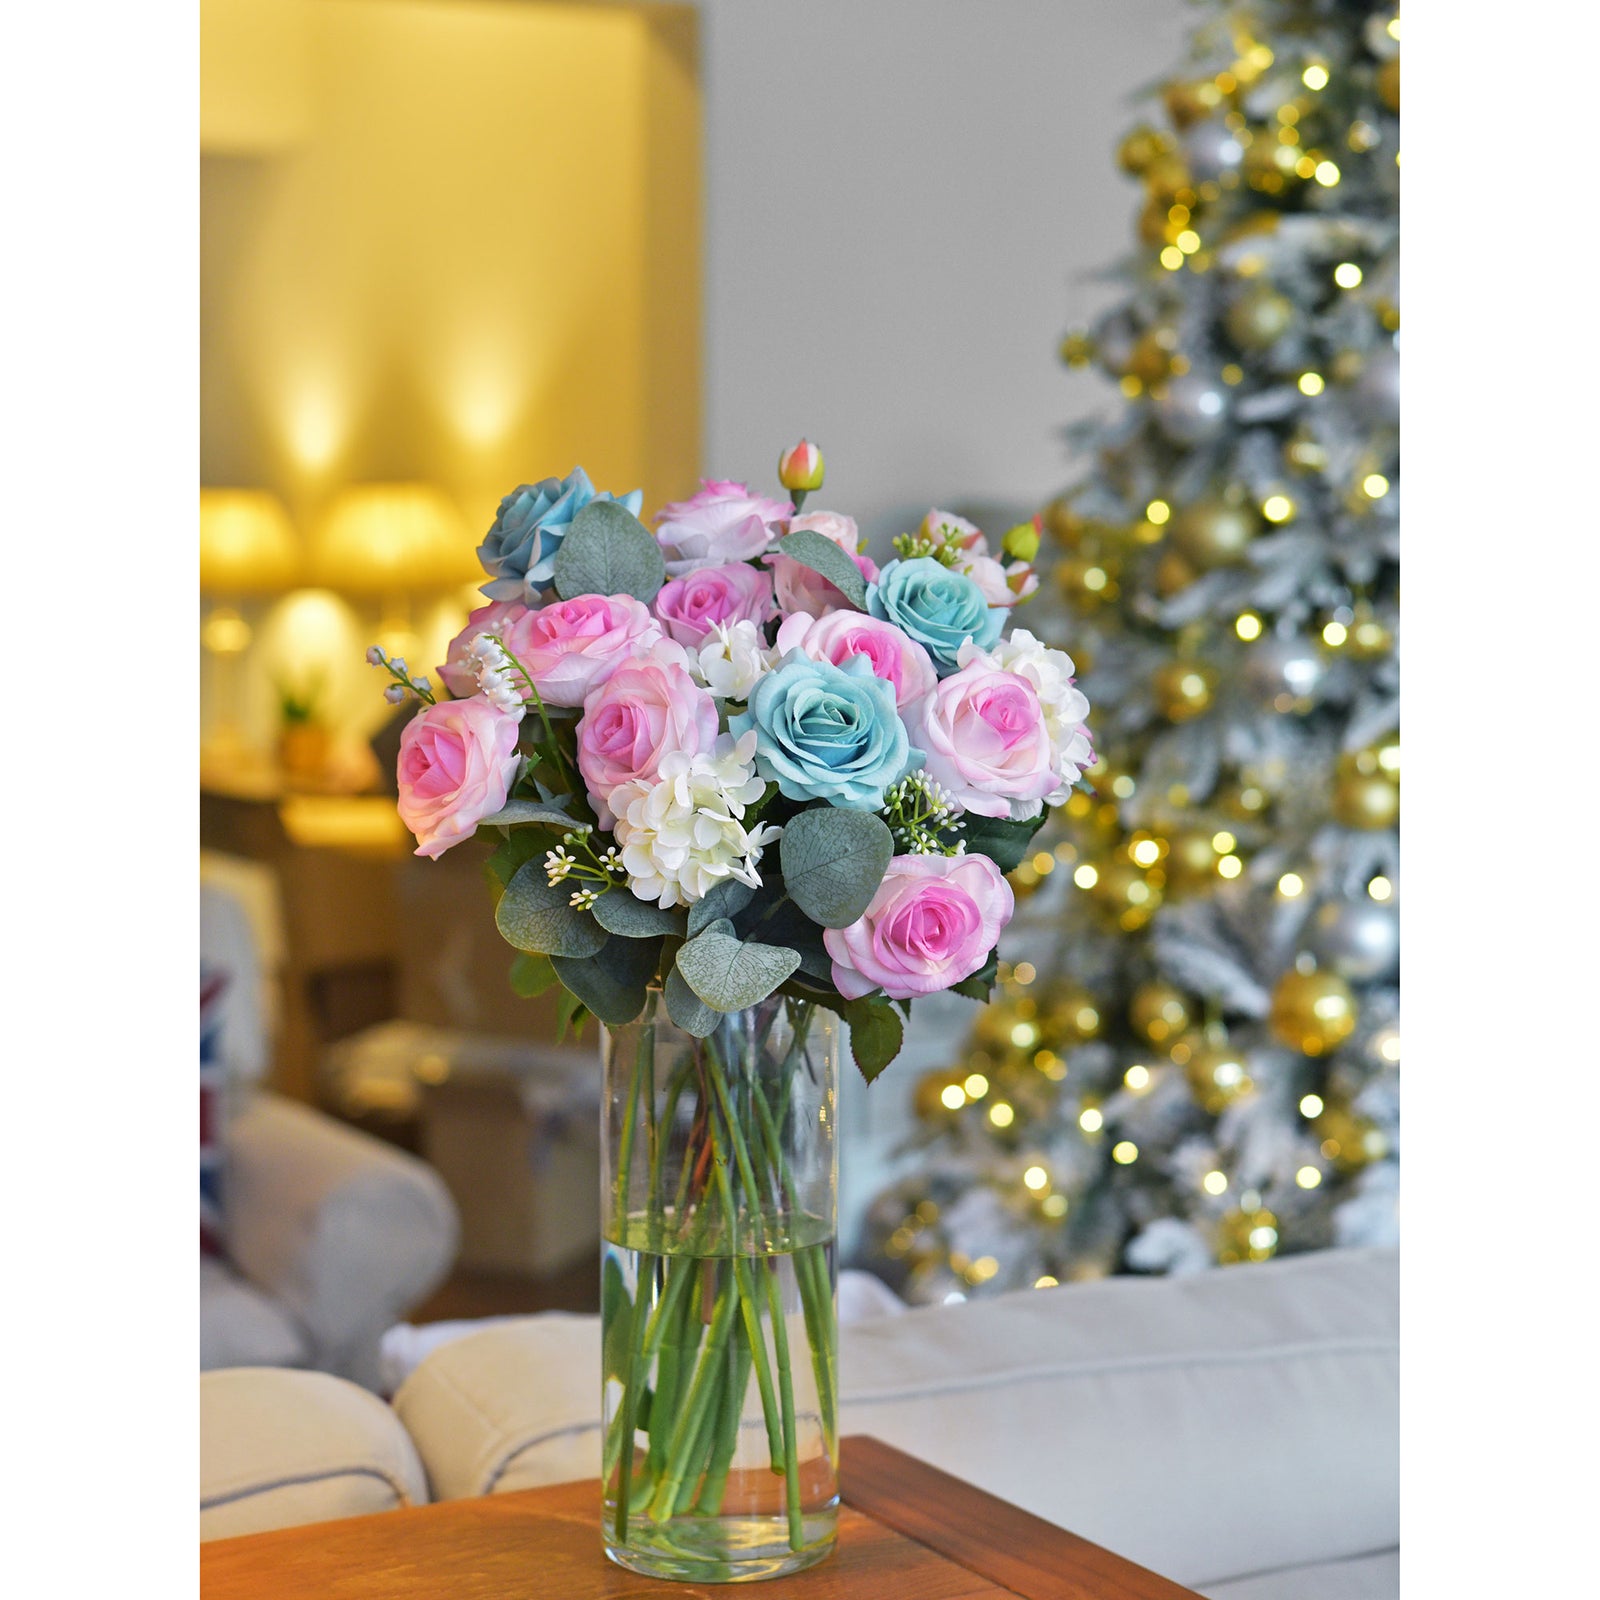 White | Purple Real Touch Silk Artificial Flowers ‘Petals Feel and Look like Fresh Roses 10 Stems